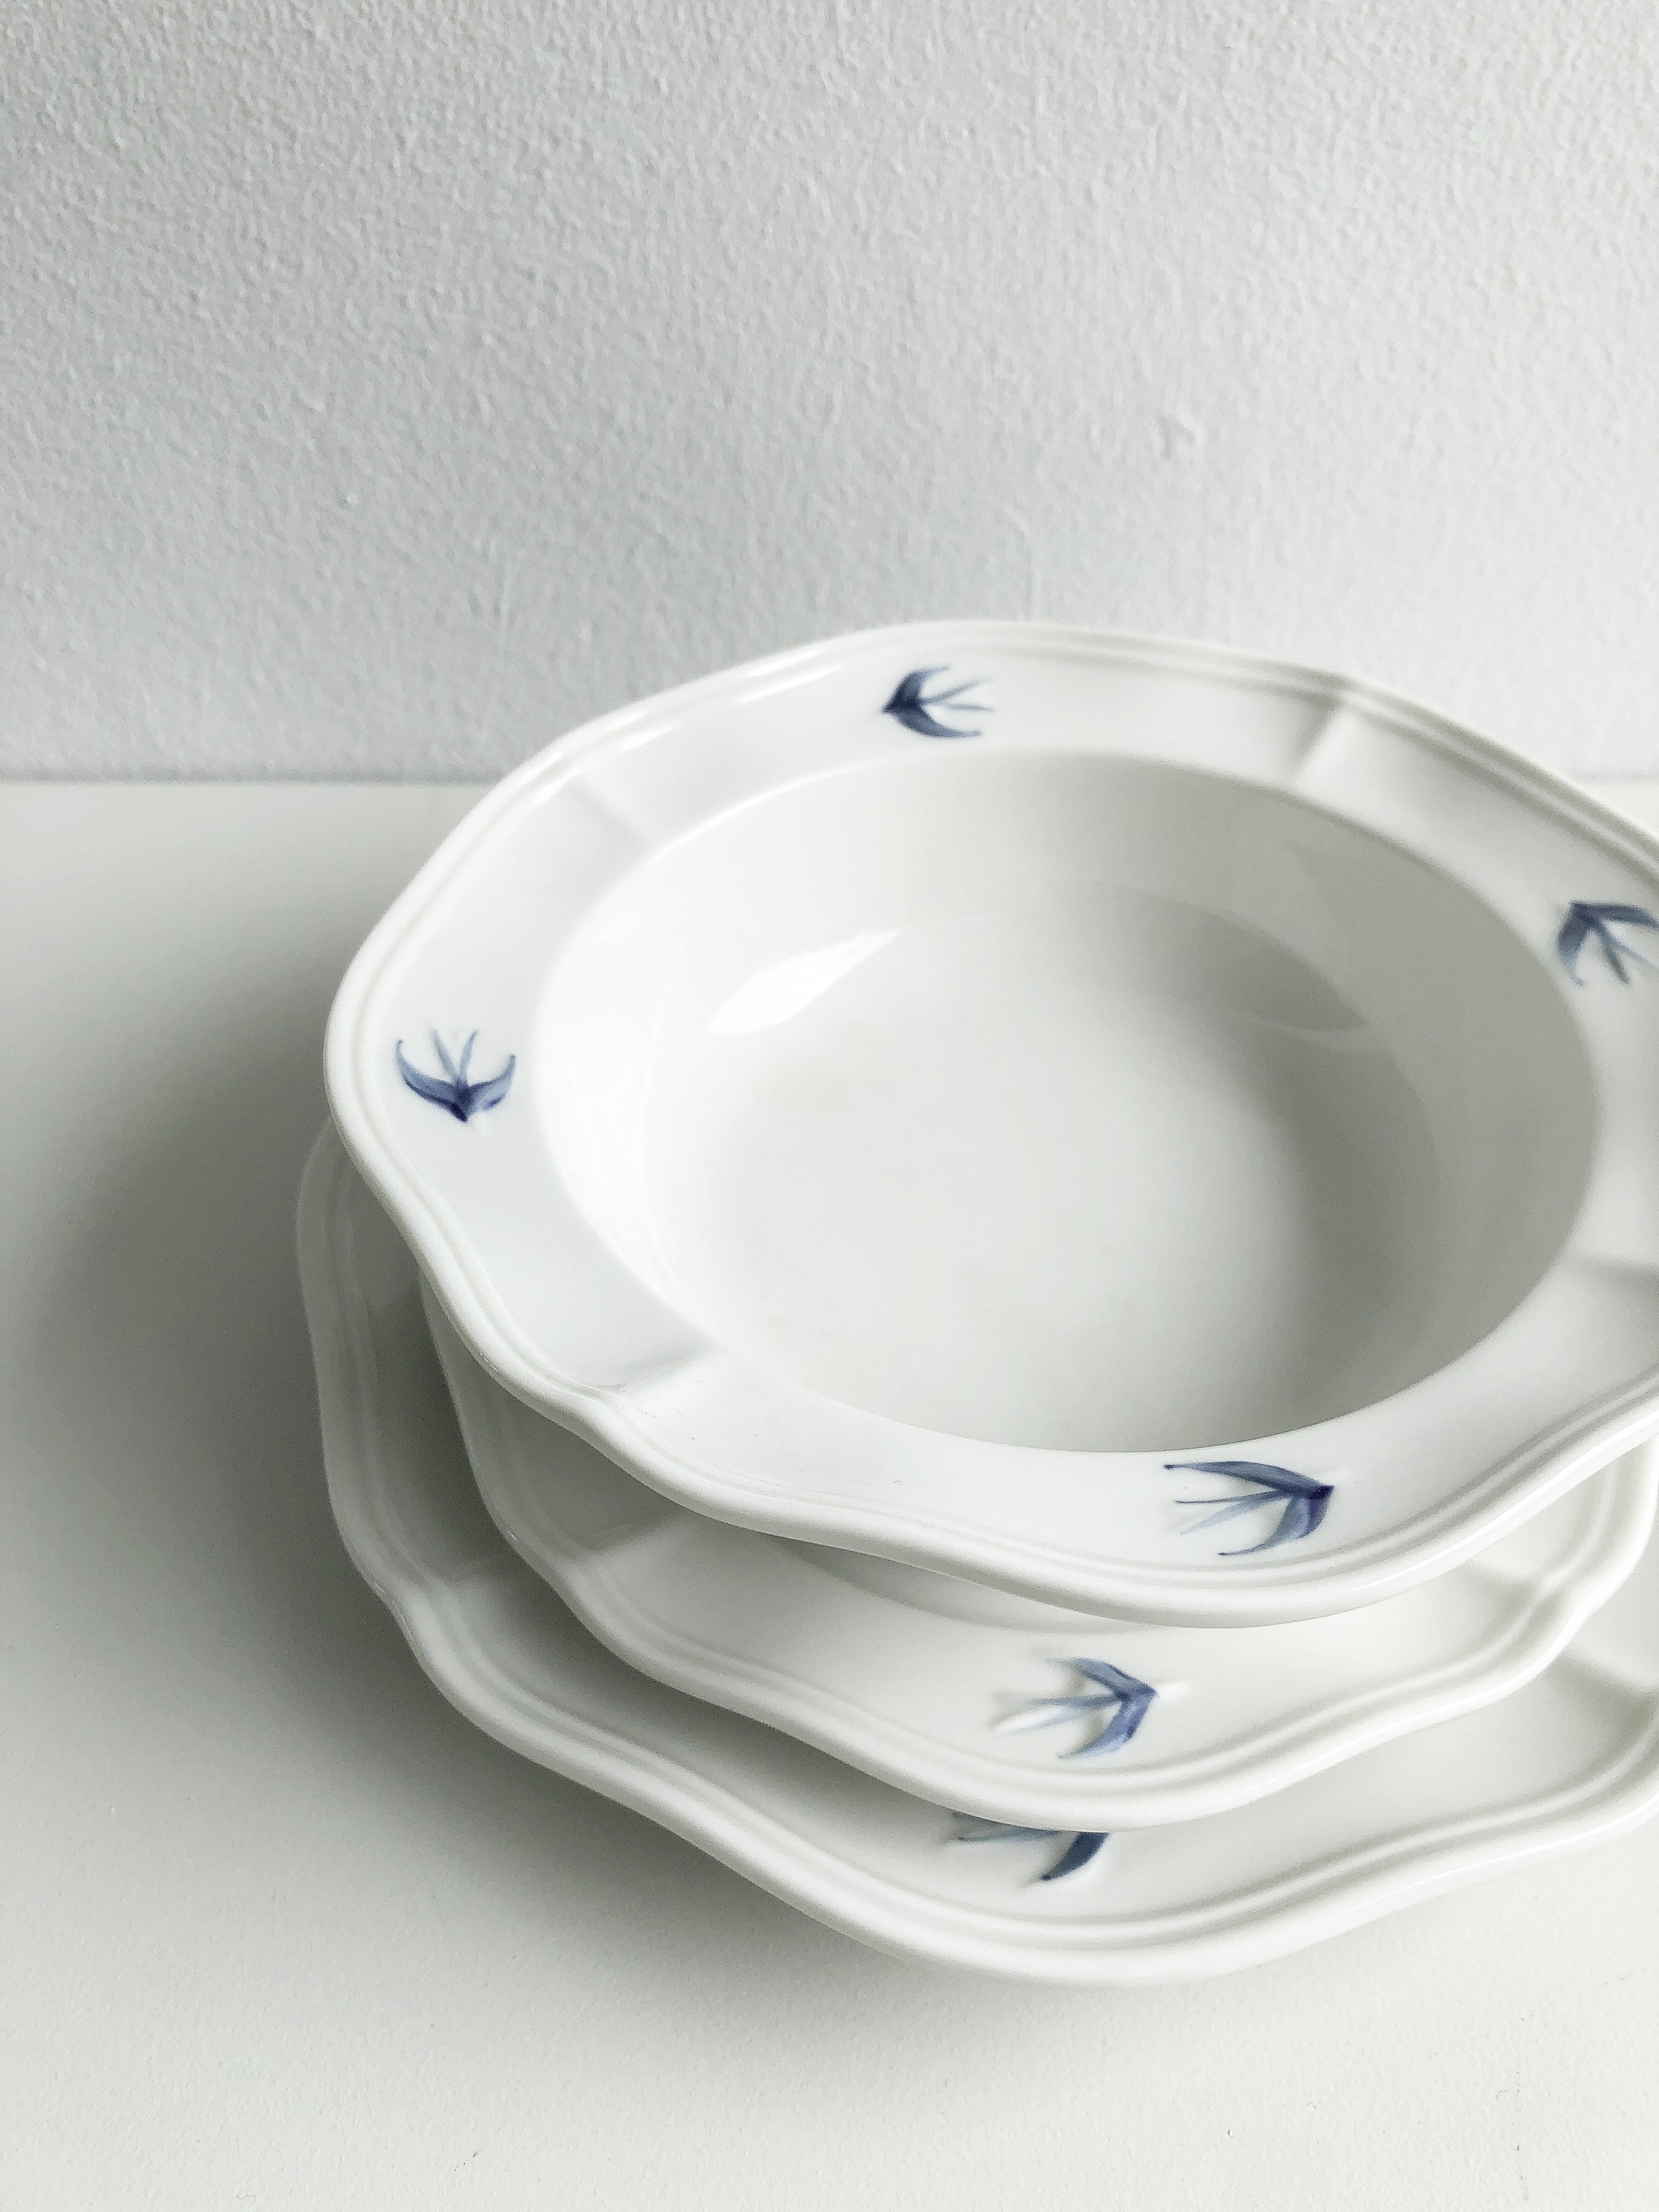 Swallow Dining Set by PROSE Tabletop